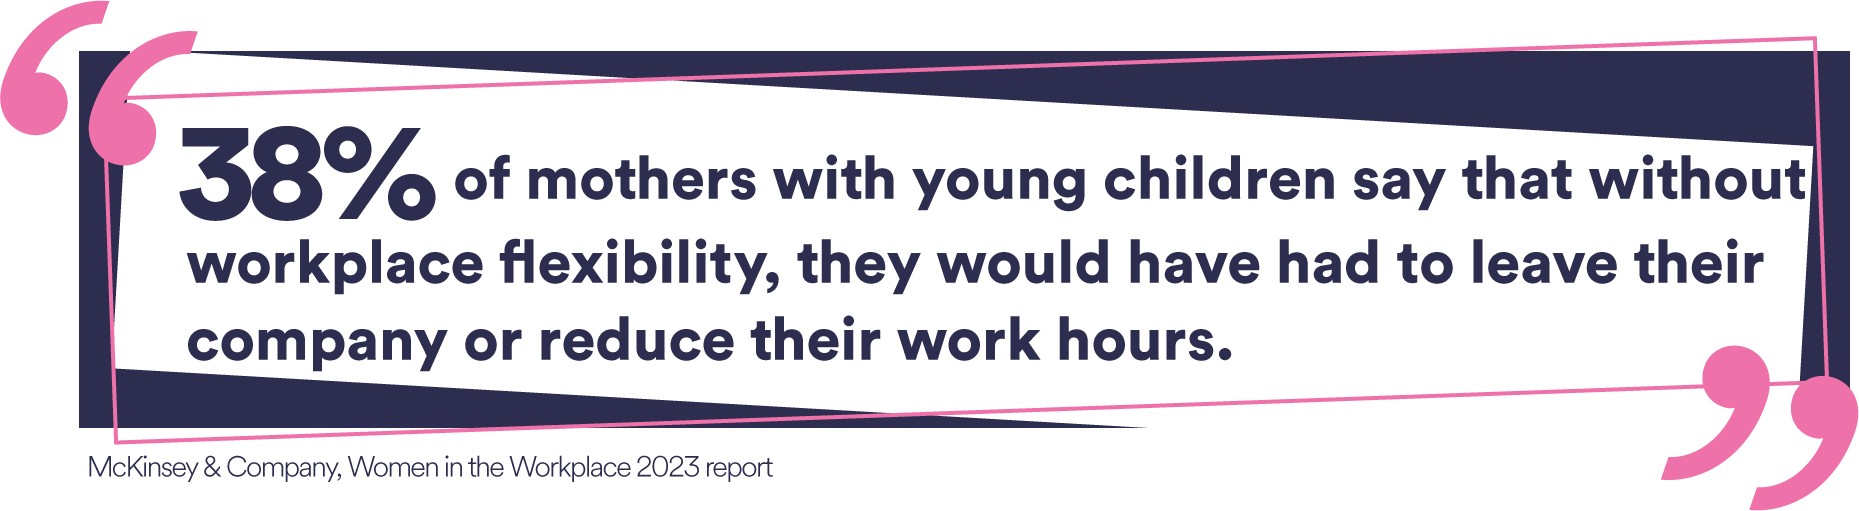 “38 percent of mothers with young children say that without workplace flexibility, they would have had to leave their company or reduce their work hours.” (McKinsey & Company, Women in the Workplace 2023 report). 